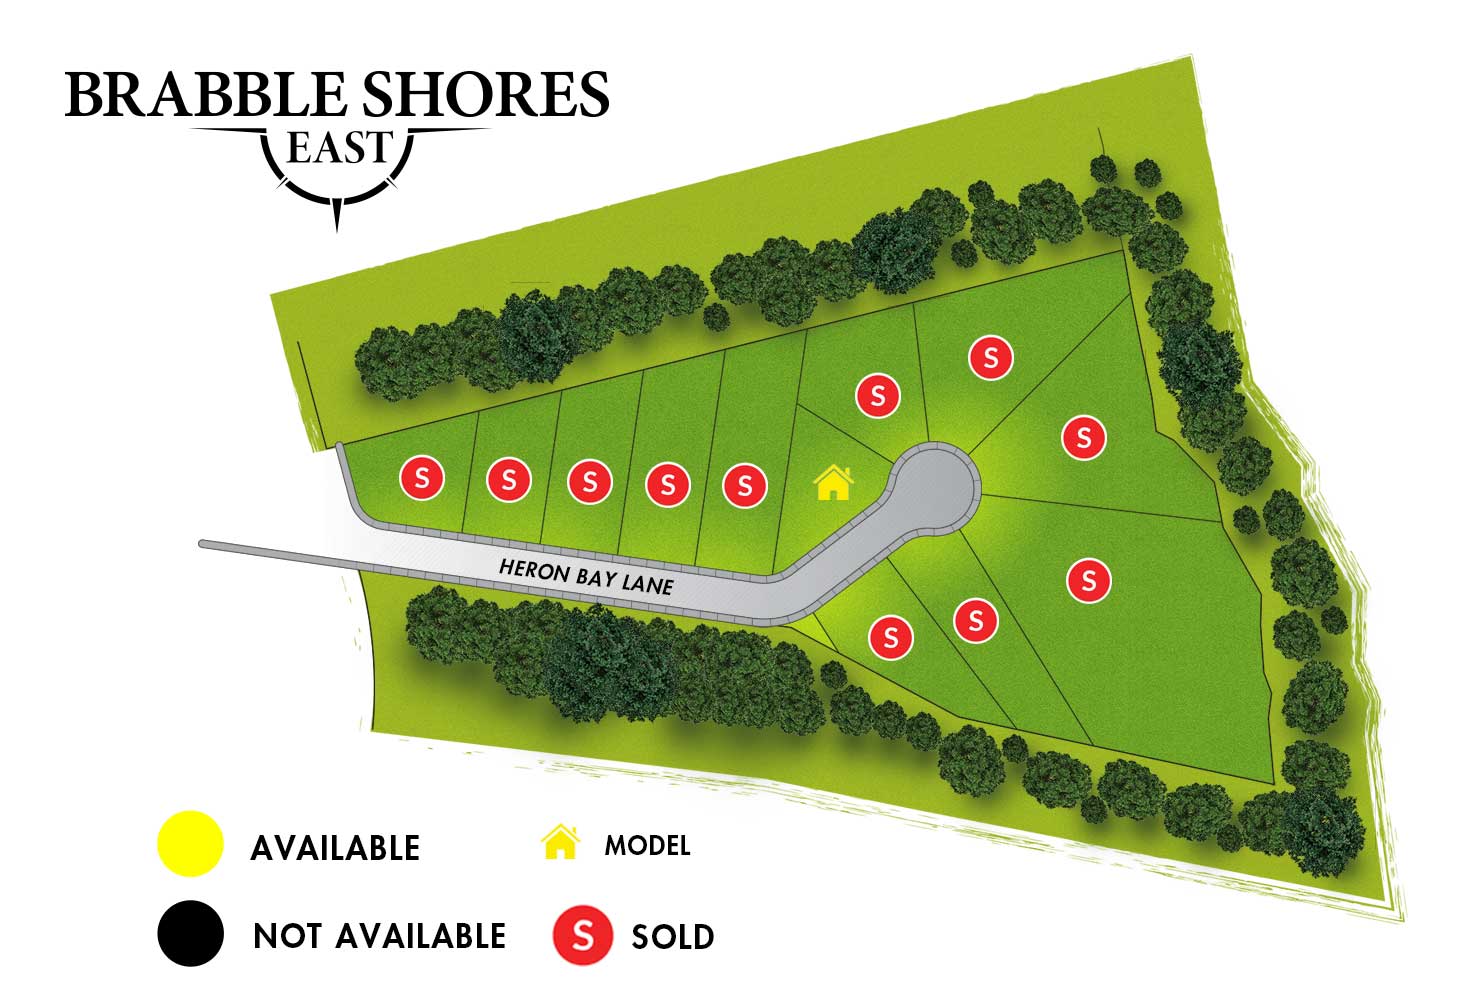 Brabble Shores Updated Map